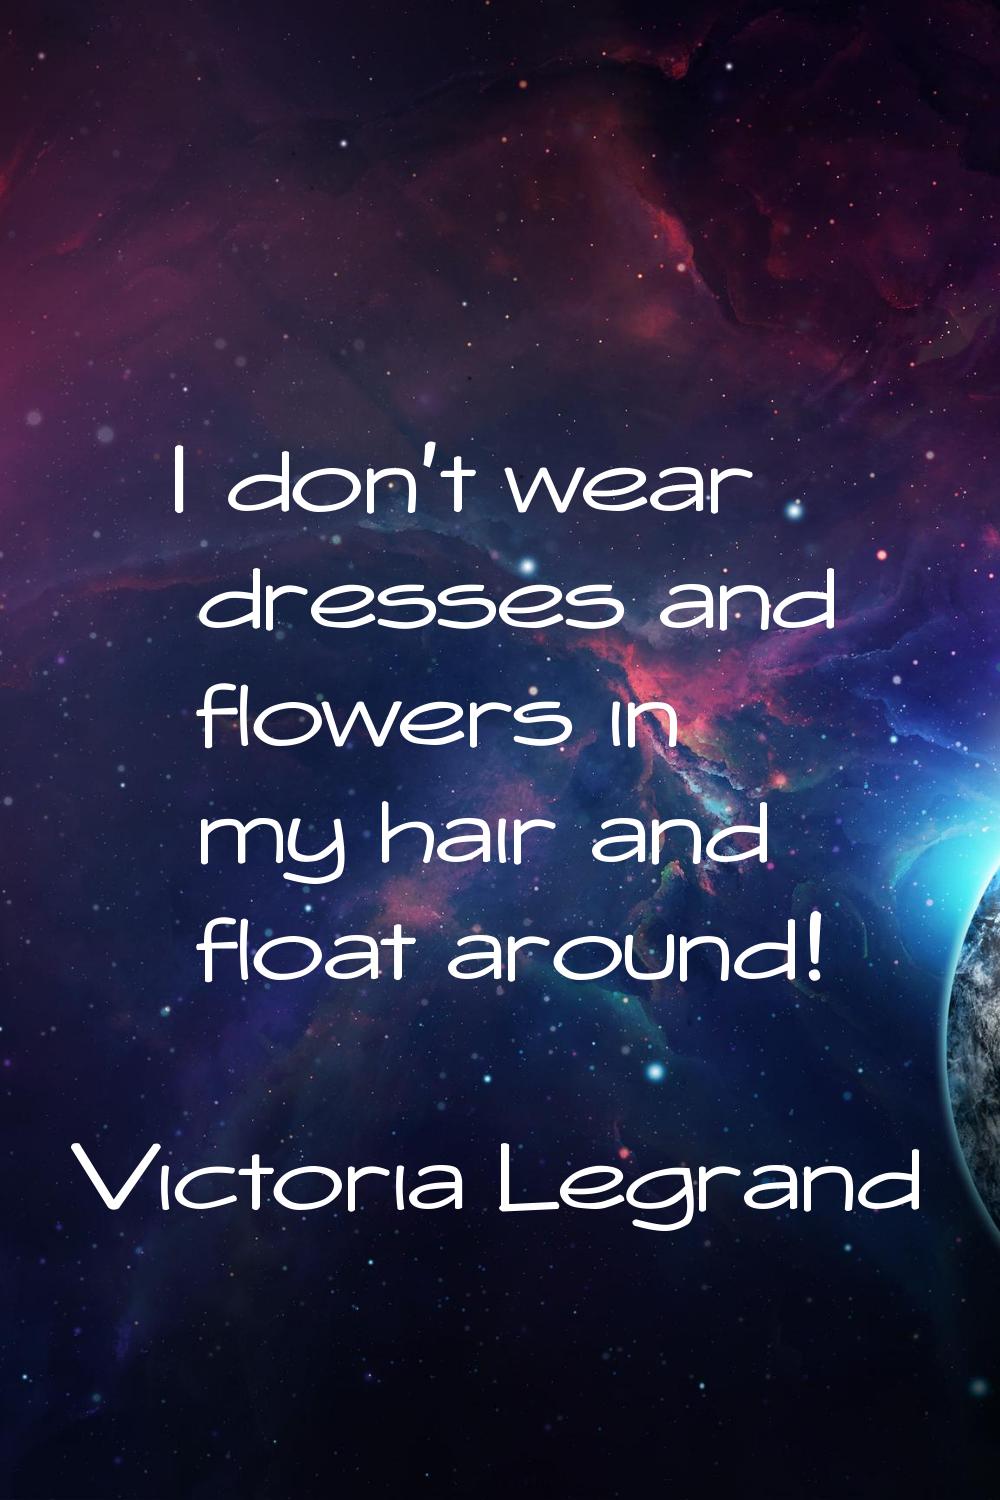 I don't wear dresses and flowers in my hair and float around!